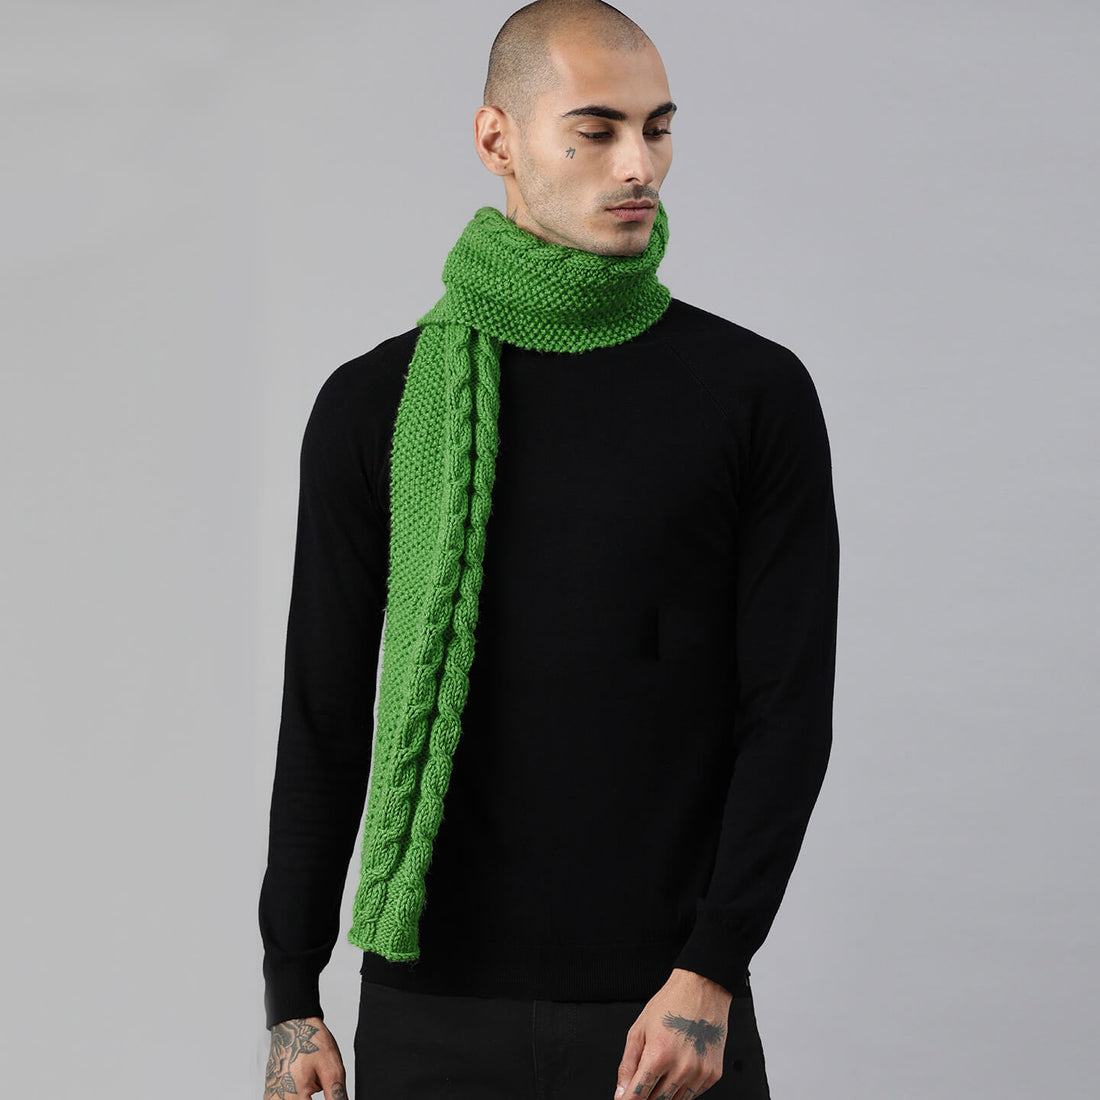 Scarf with Cable Design - Olive Green 2635